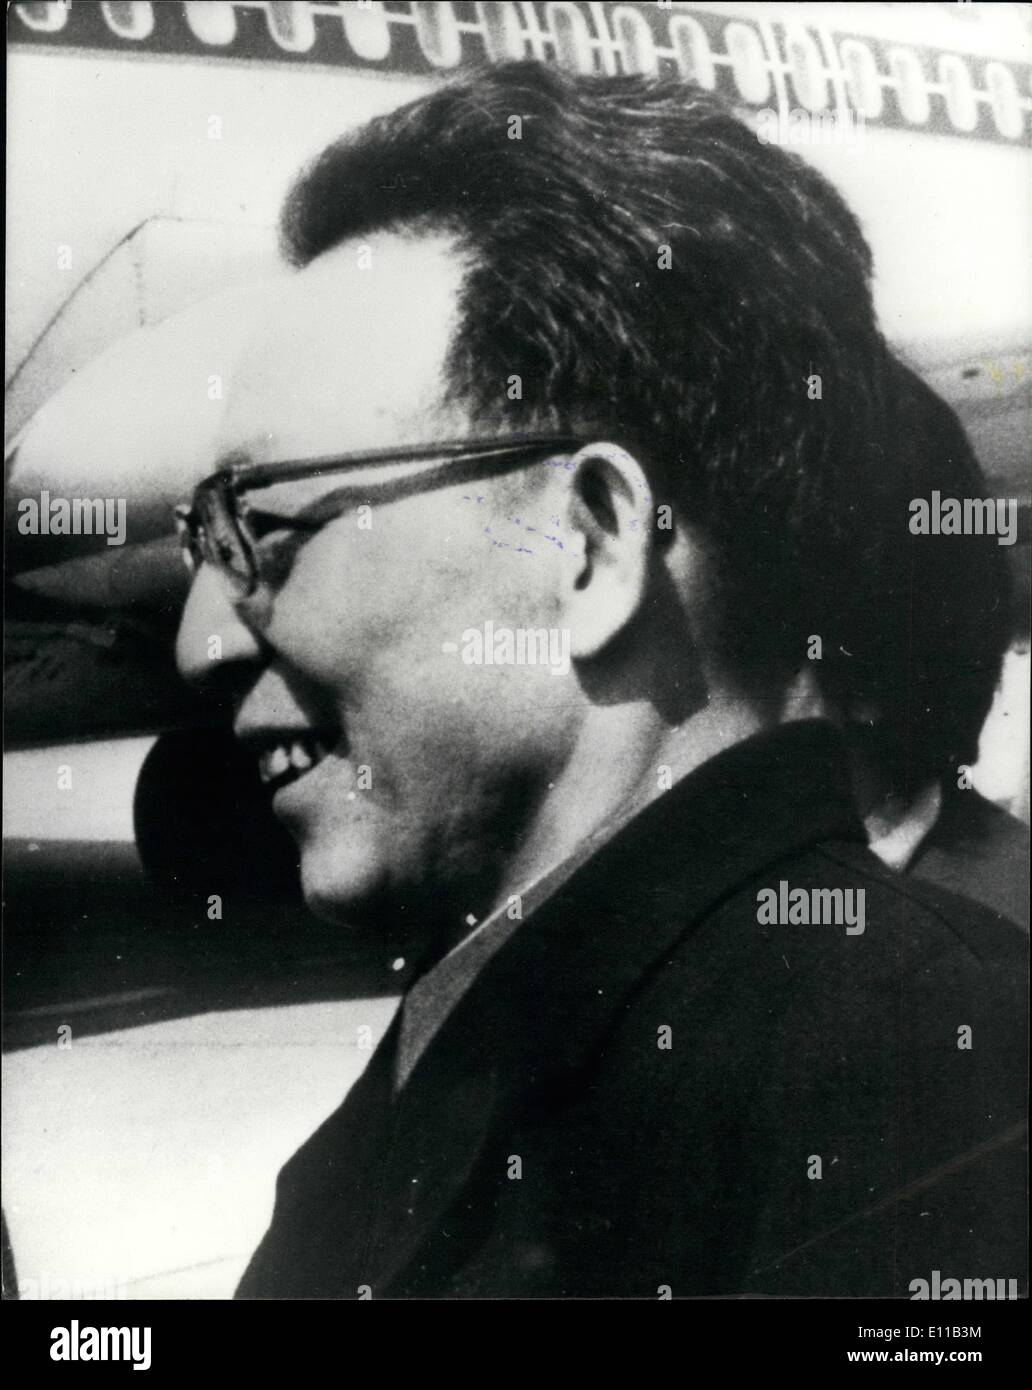 Oct. 12, 1976 - October 12, 1976 Mao's widow arrested with three other Chinese leaders in Peking. Chairman Mao's widow, Chiang Ching and her three fellow radicals in the Chinese Pelitbure, have been arrested and charges with plotting a coup d'etat, according to reliable sources in Peking. Photo Shows: Chang Chun-Chiao, who is said to be under arrest in Peking. Stock Photo